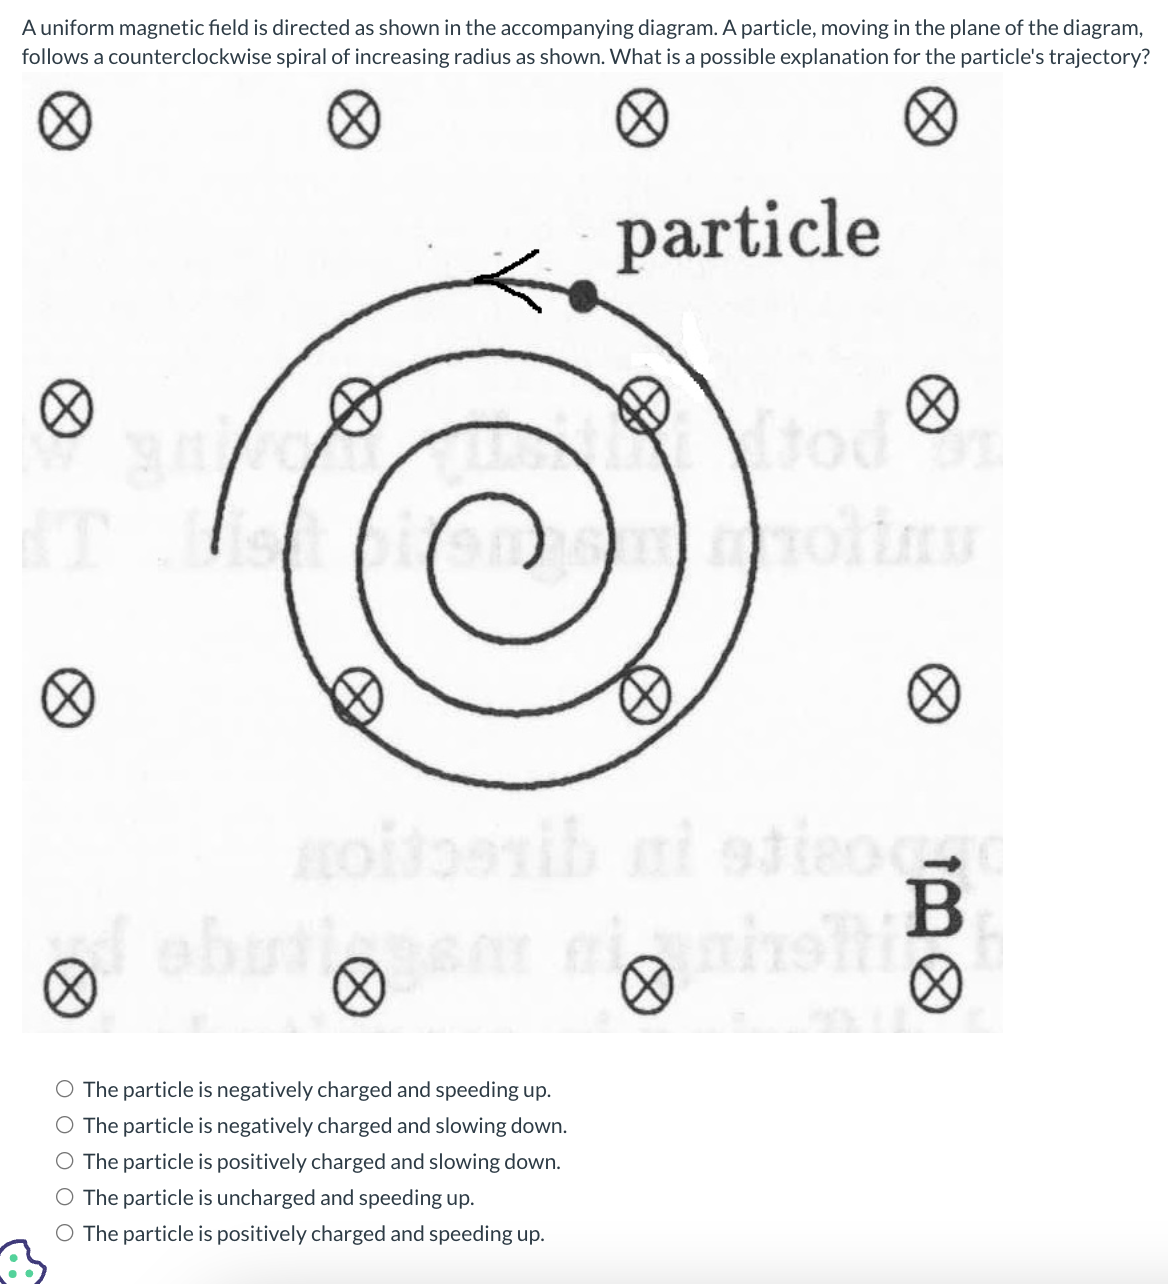 A uniform magnetic field is directed as shown in the accompanying diagram. A particle, moving in the plane of the diagram,
follows a counterclockwise spiral of increasing radius as shown. What is a possible explanation for the particle's trajectory?
HO
The particle is negatively charged and speeding up.
The particle is negatively charged and slowing down.
The particle is positively charged and slowing down.
O The particle is uncharged and speeding up.
O The particle is positively charged and speeding up.
particle
B